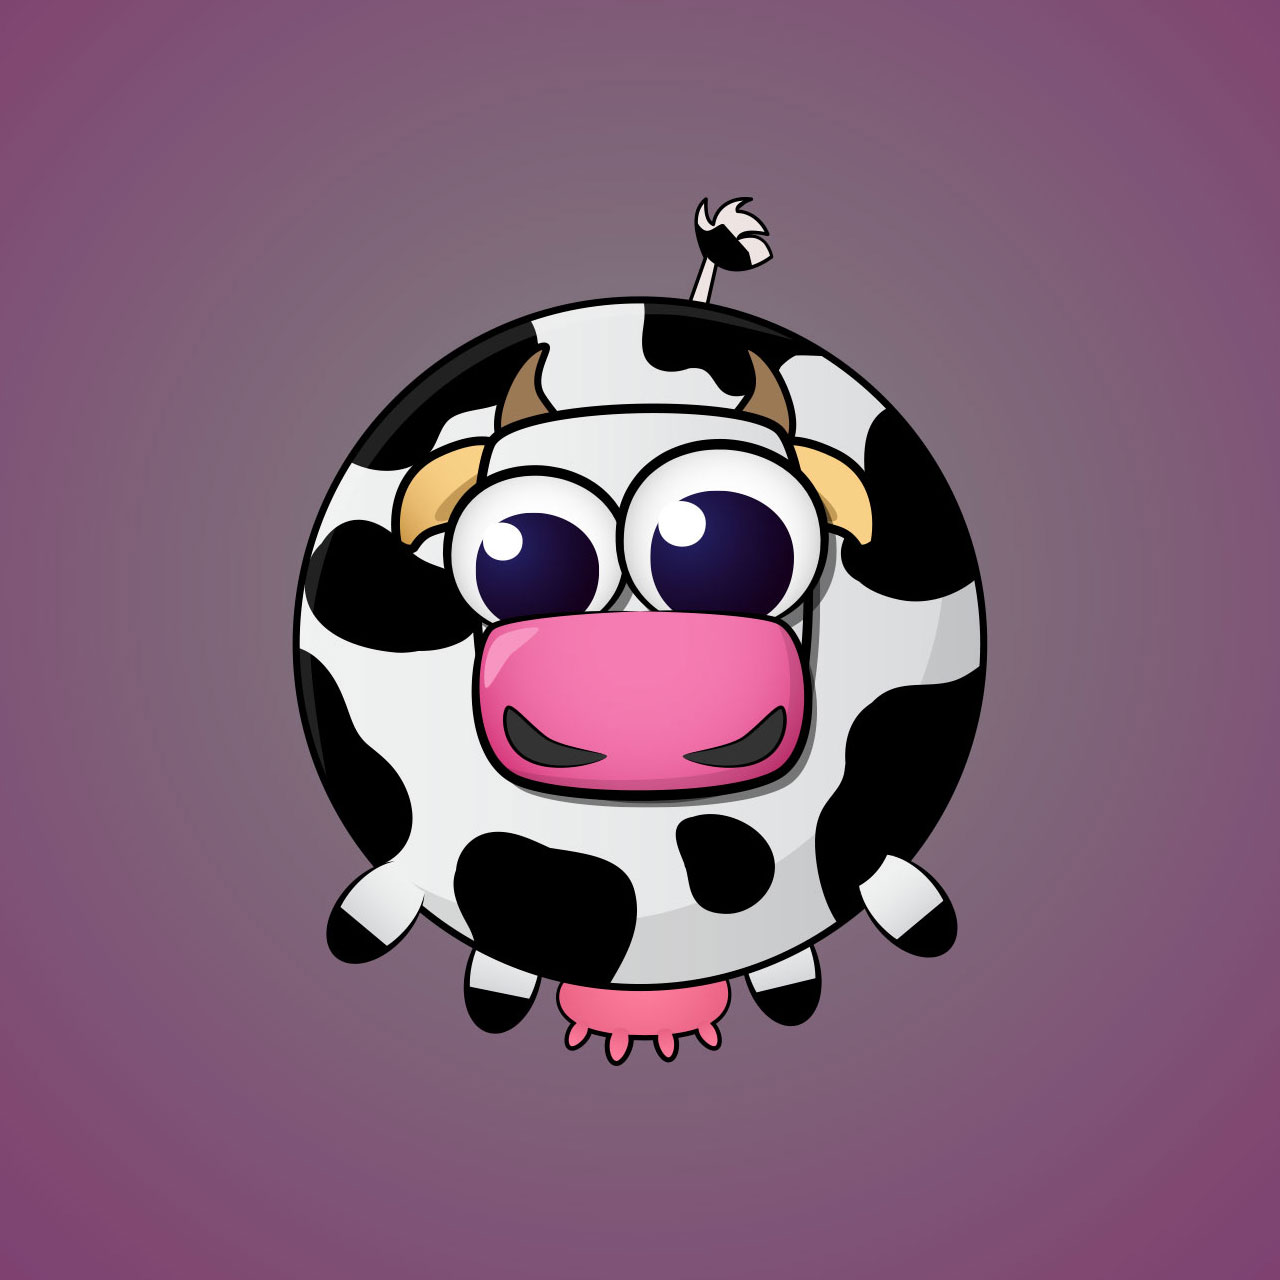 Cow Minimal Vector Character Design For A Casual Mobile Game